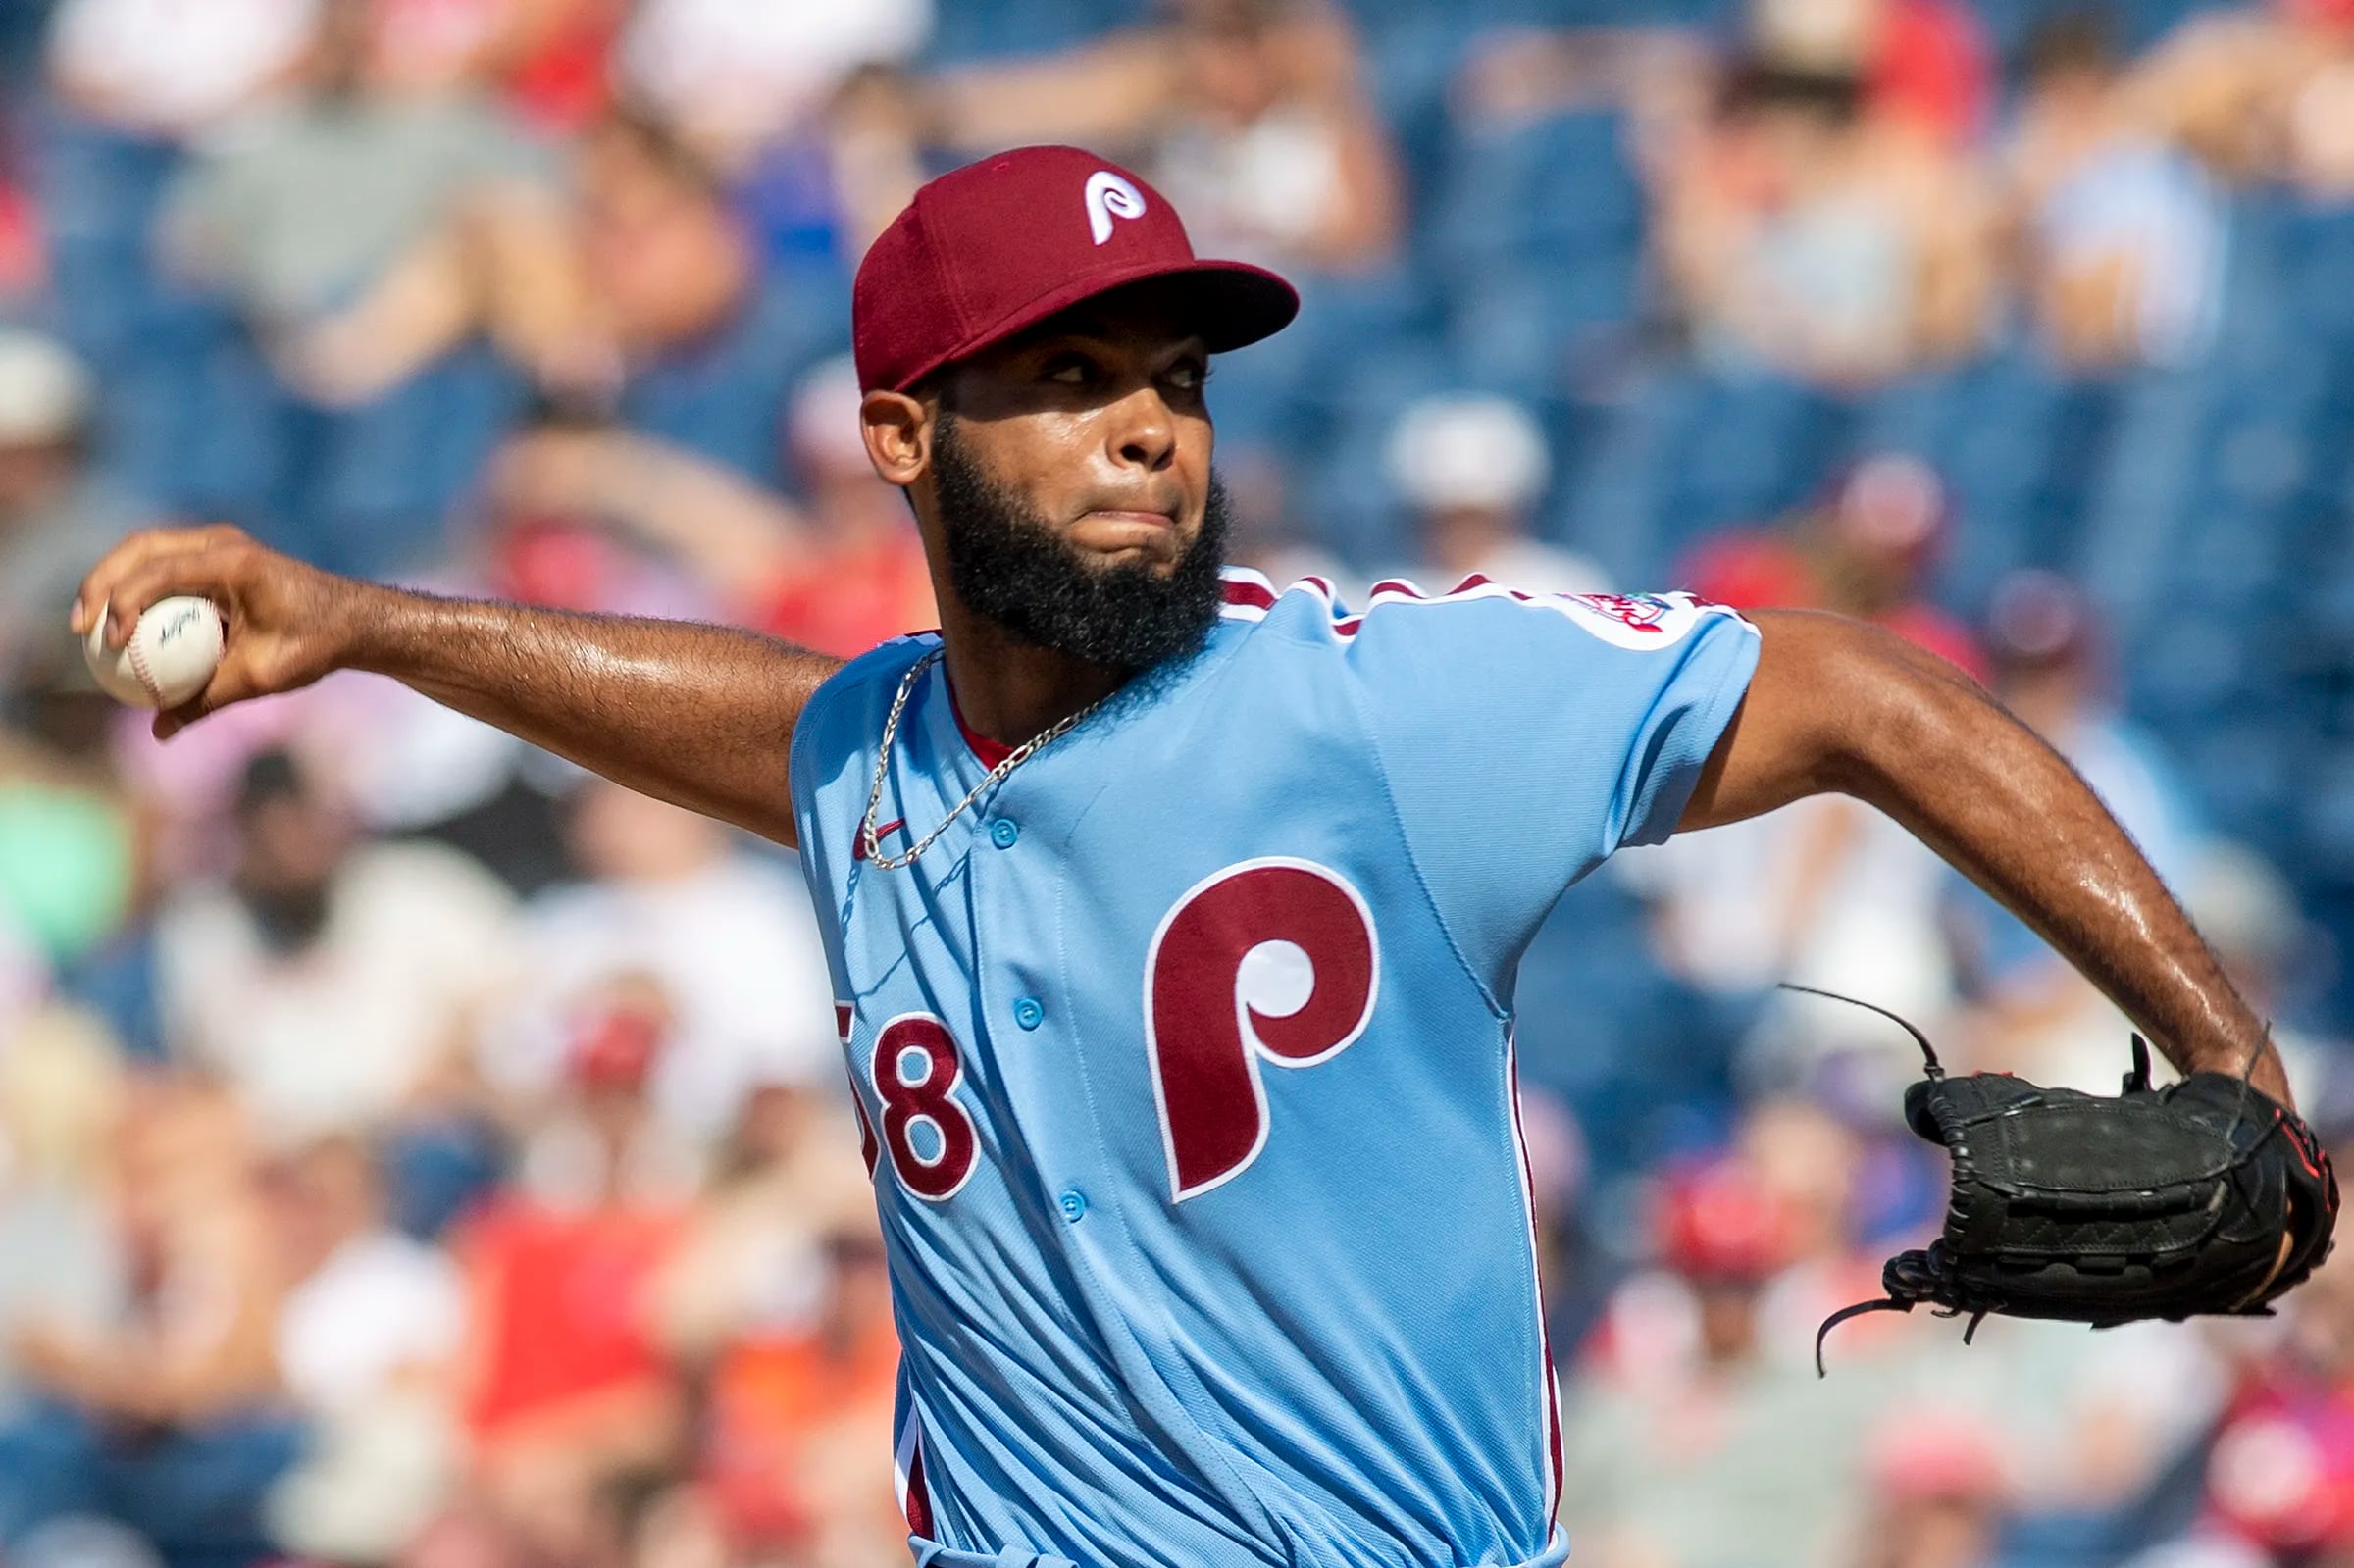 Phillies: Seranthony Dominguez makes rehab appearance for IronPigs